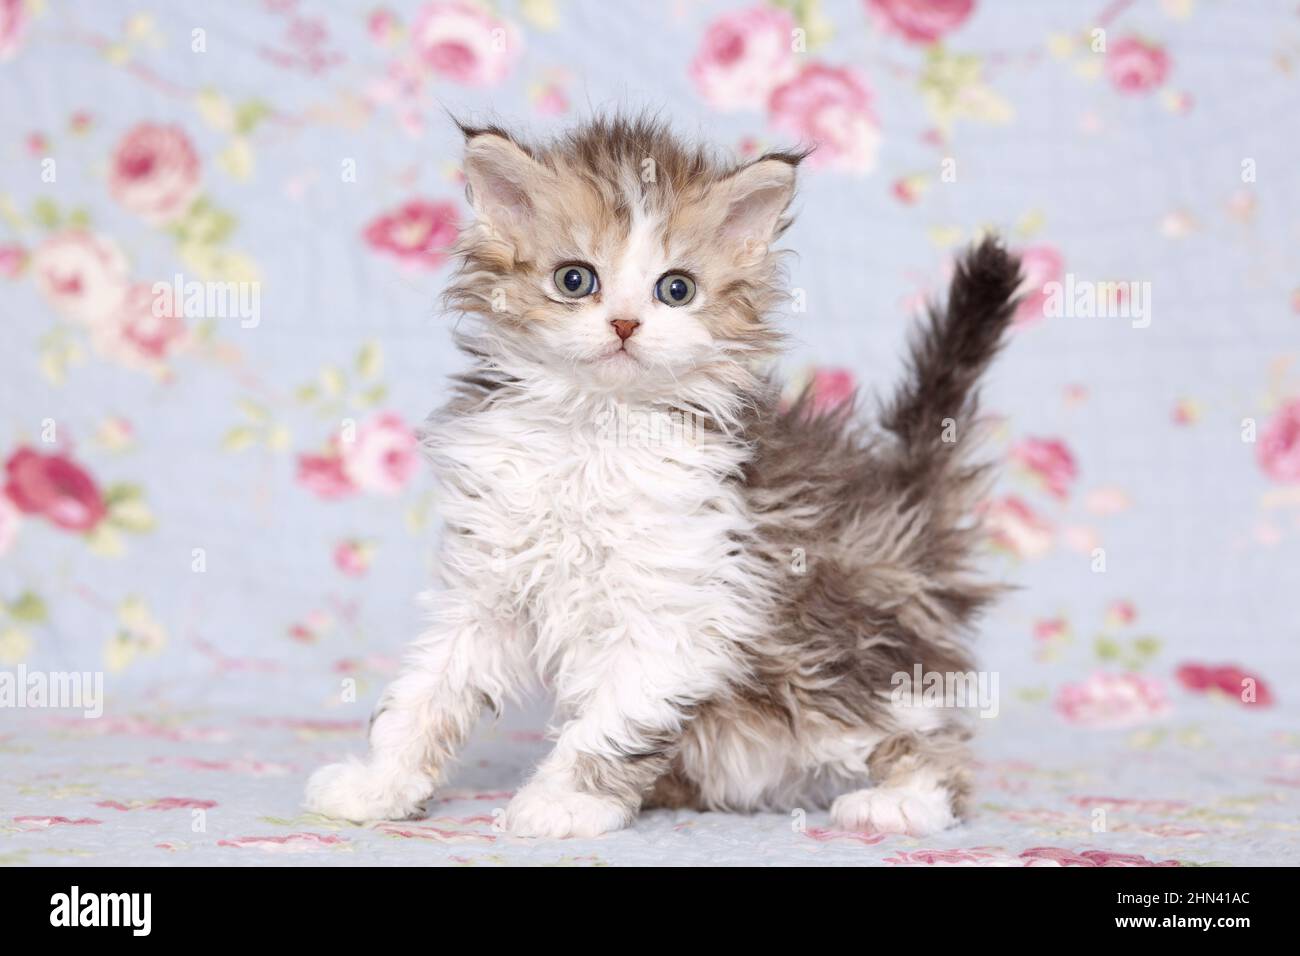 Selkirk Rex. Kitten standing on a blanket with flower print. Studio picture. Germany Stock Photo